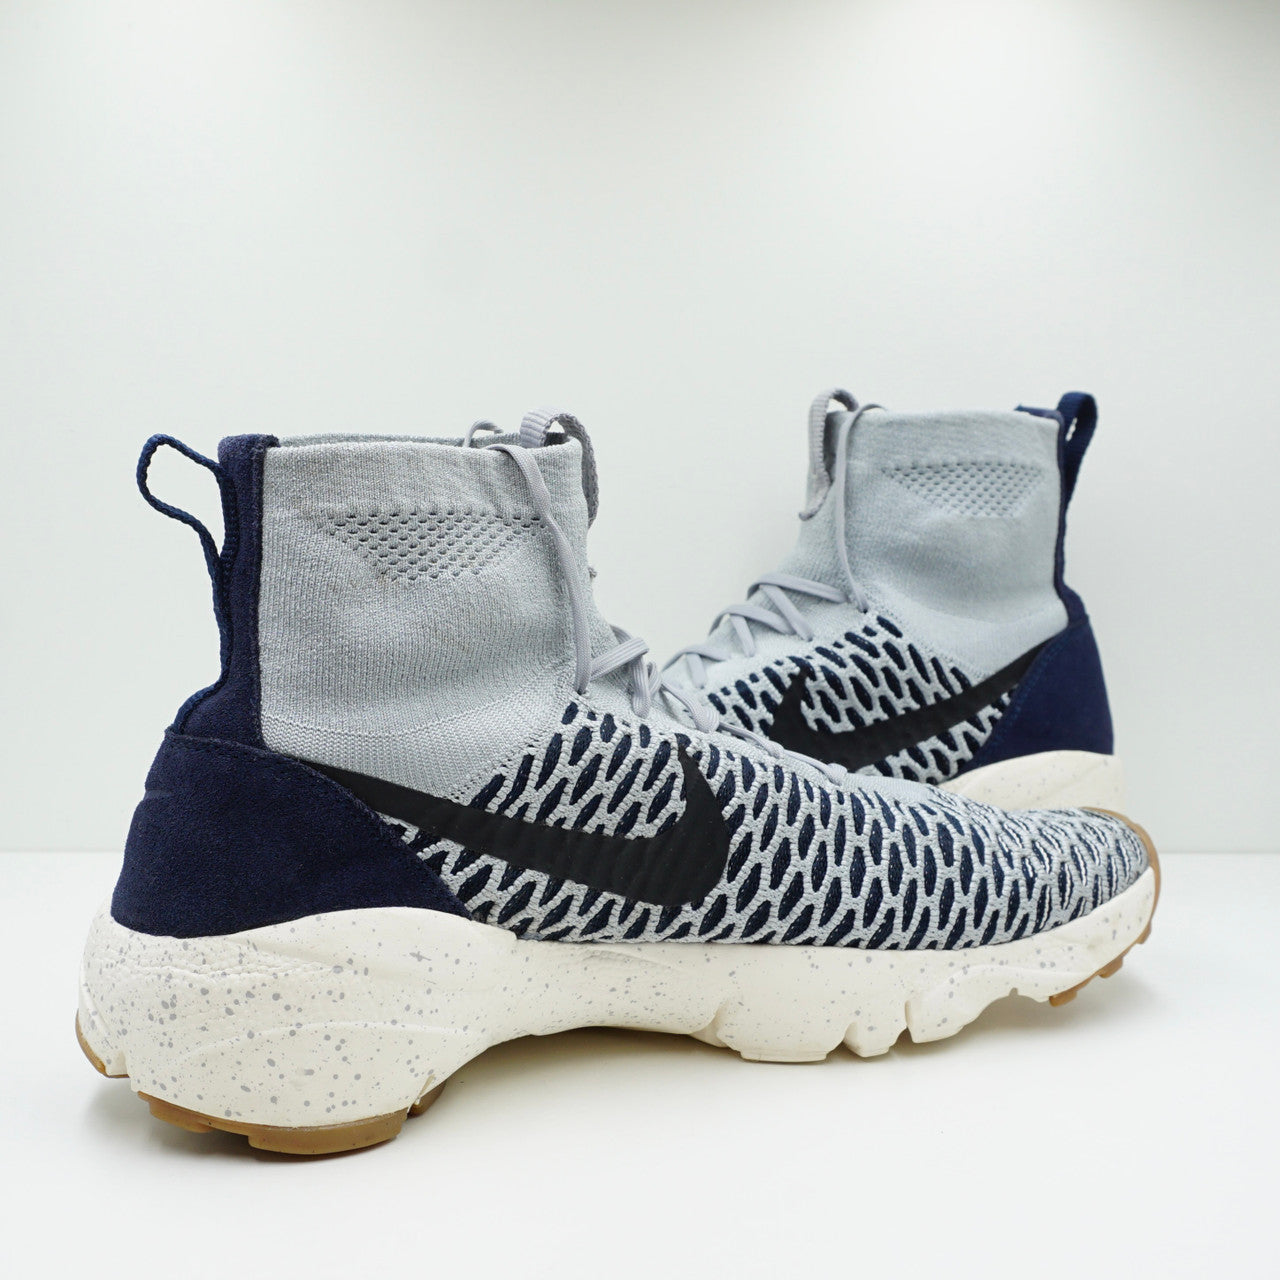 Nike Air Footscape Magista Flyknit Wolf Grey